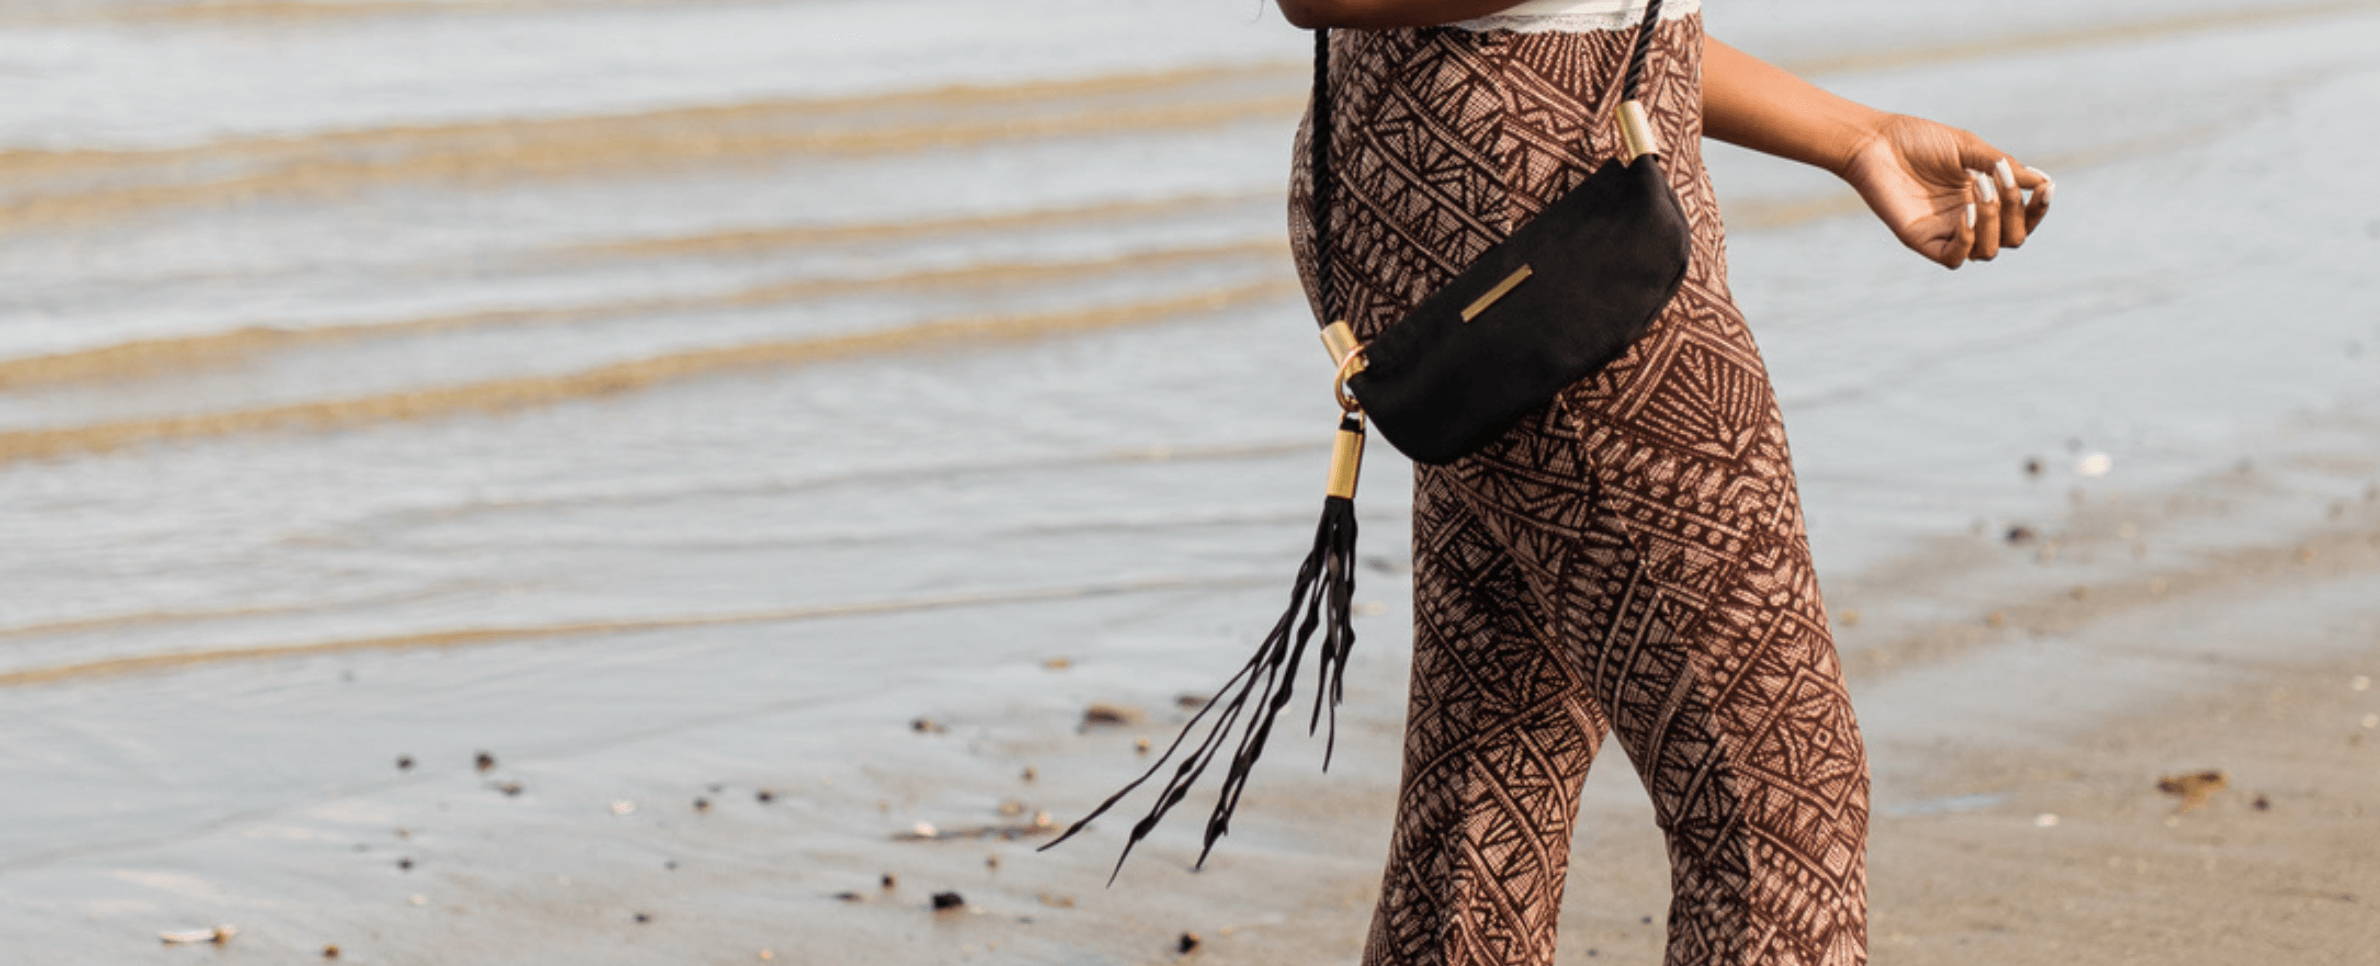 small black leather bag with brass, rope and a seaweed tassel by the beach